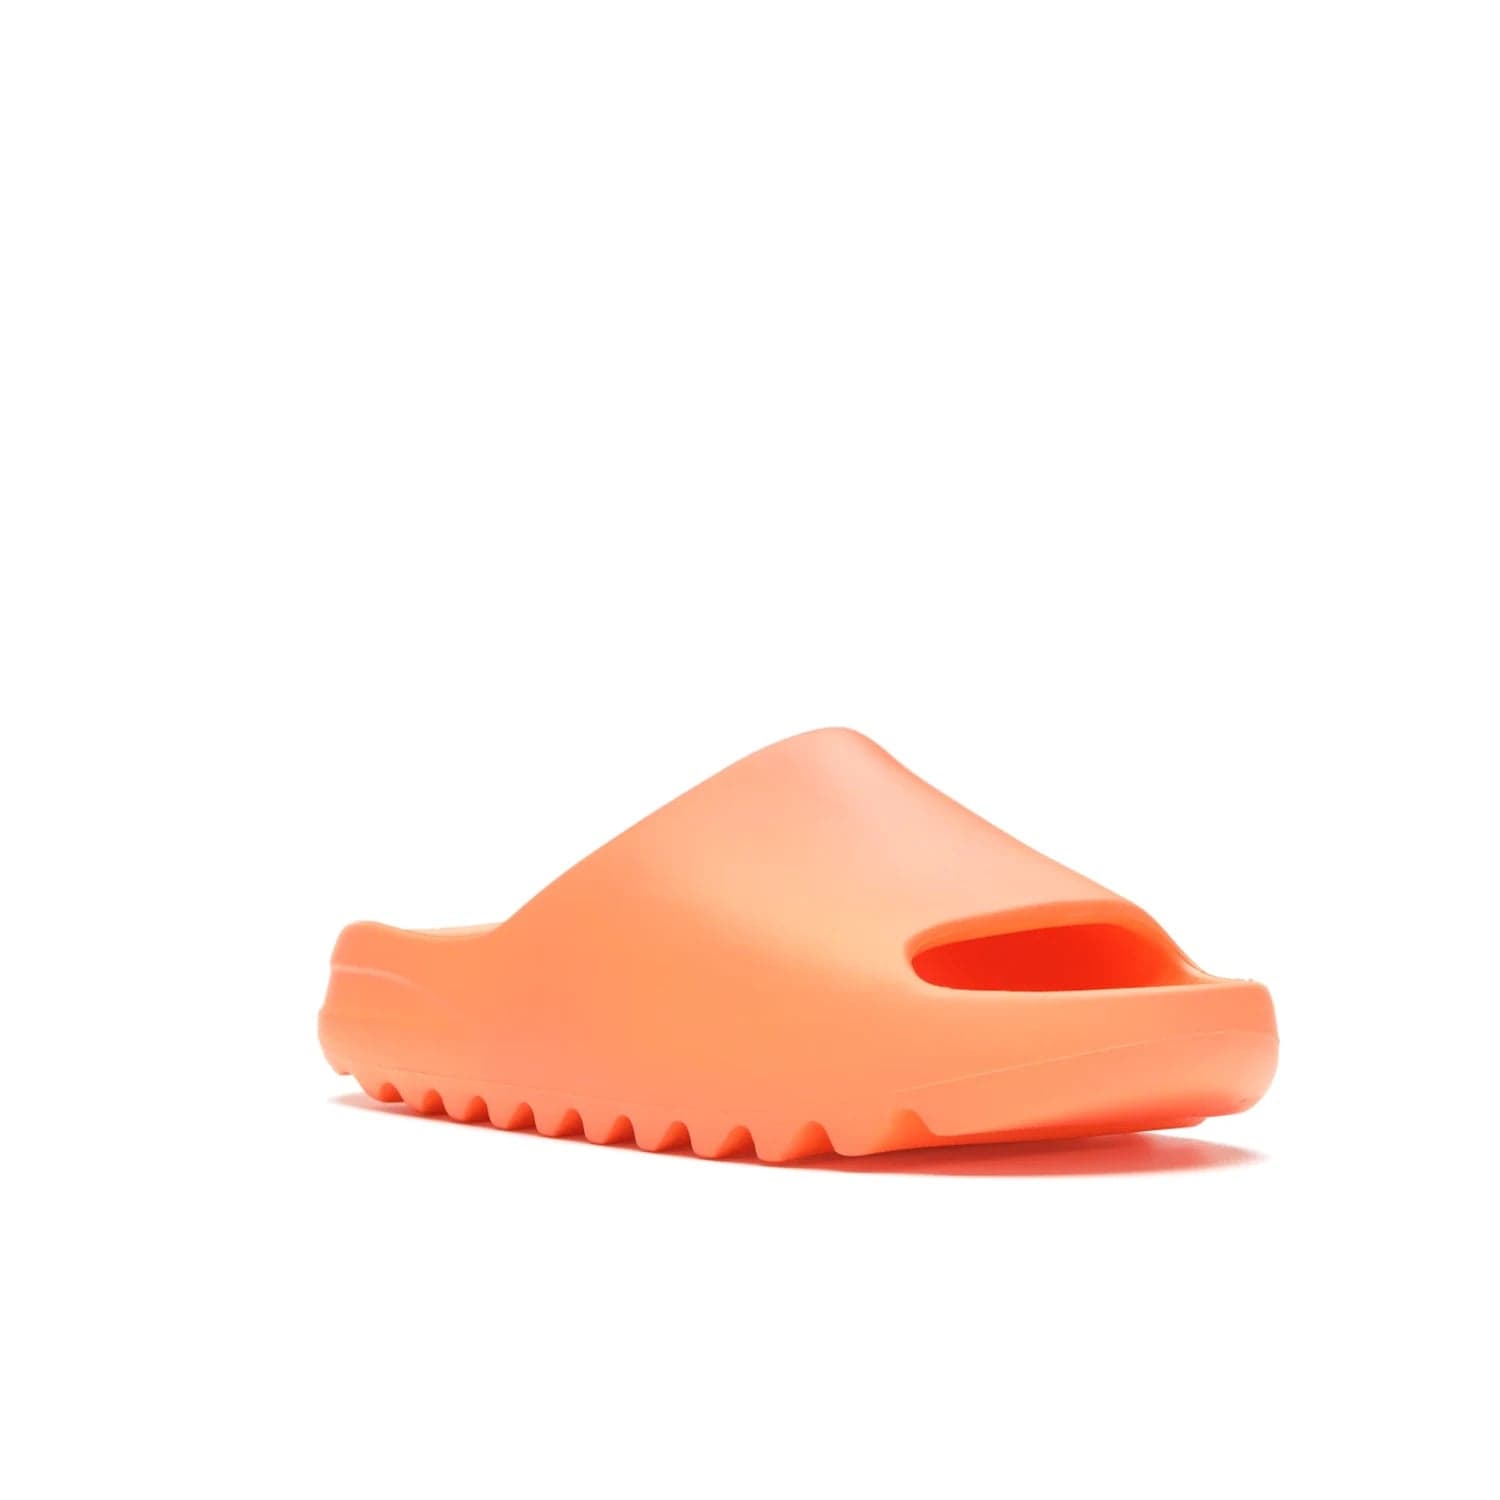 adidas Yeezy Slide Enflame Orange - Image 6 - Only at www.BallersClubKickz.com - Limited edition adidas Yeezy Slide featuring a bold Enflame Orange upper and EVA foam construction. Grooved outsole for traction and support. Released June 2021. Perfect for summer.